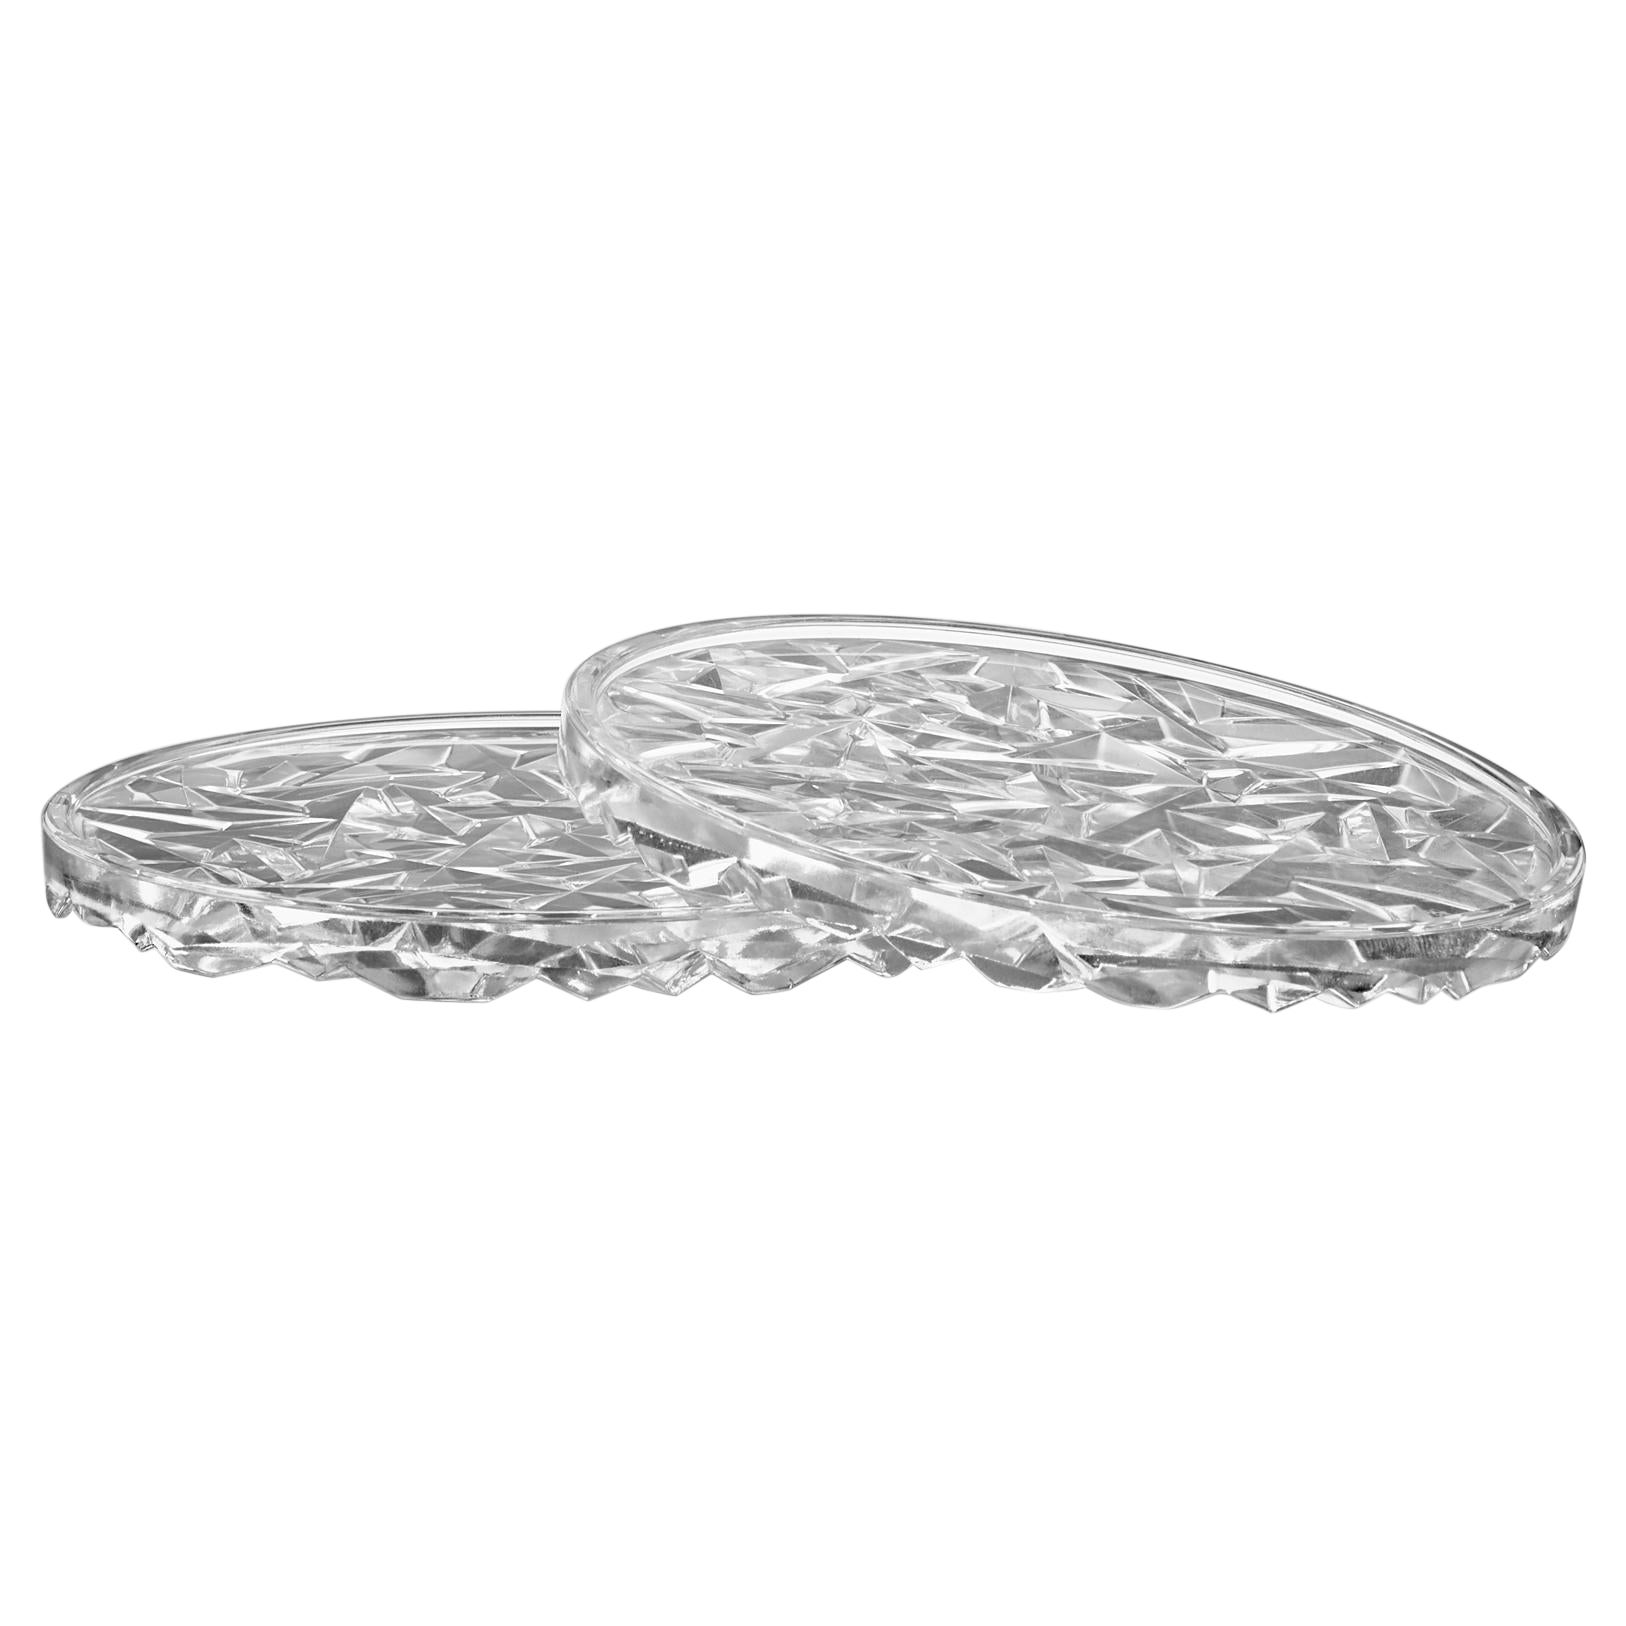 Orrefors Carat Coaster Small 2-Pack